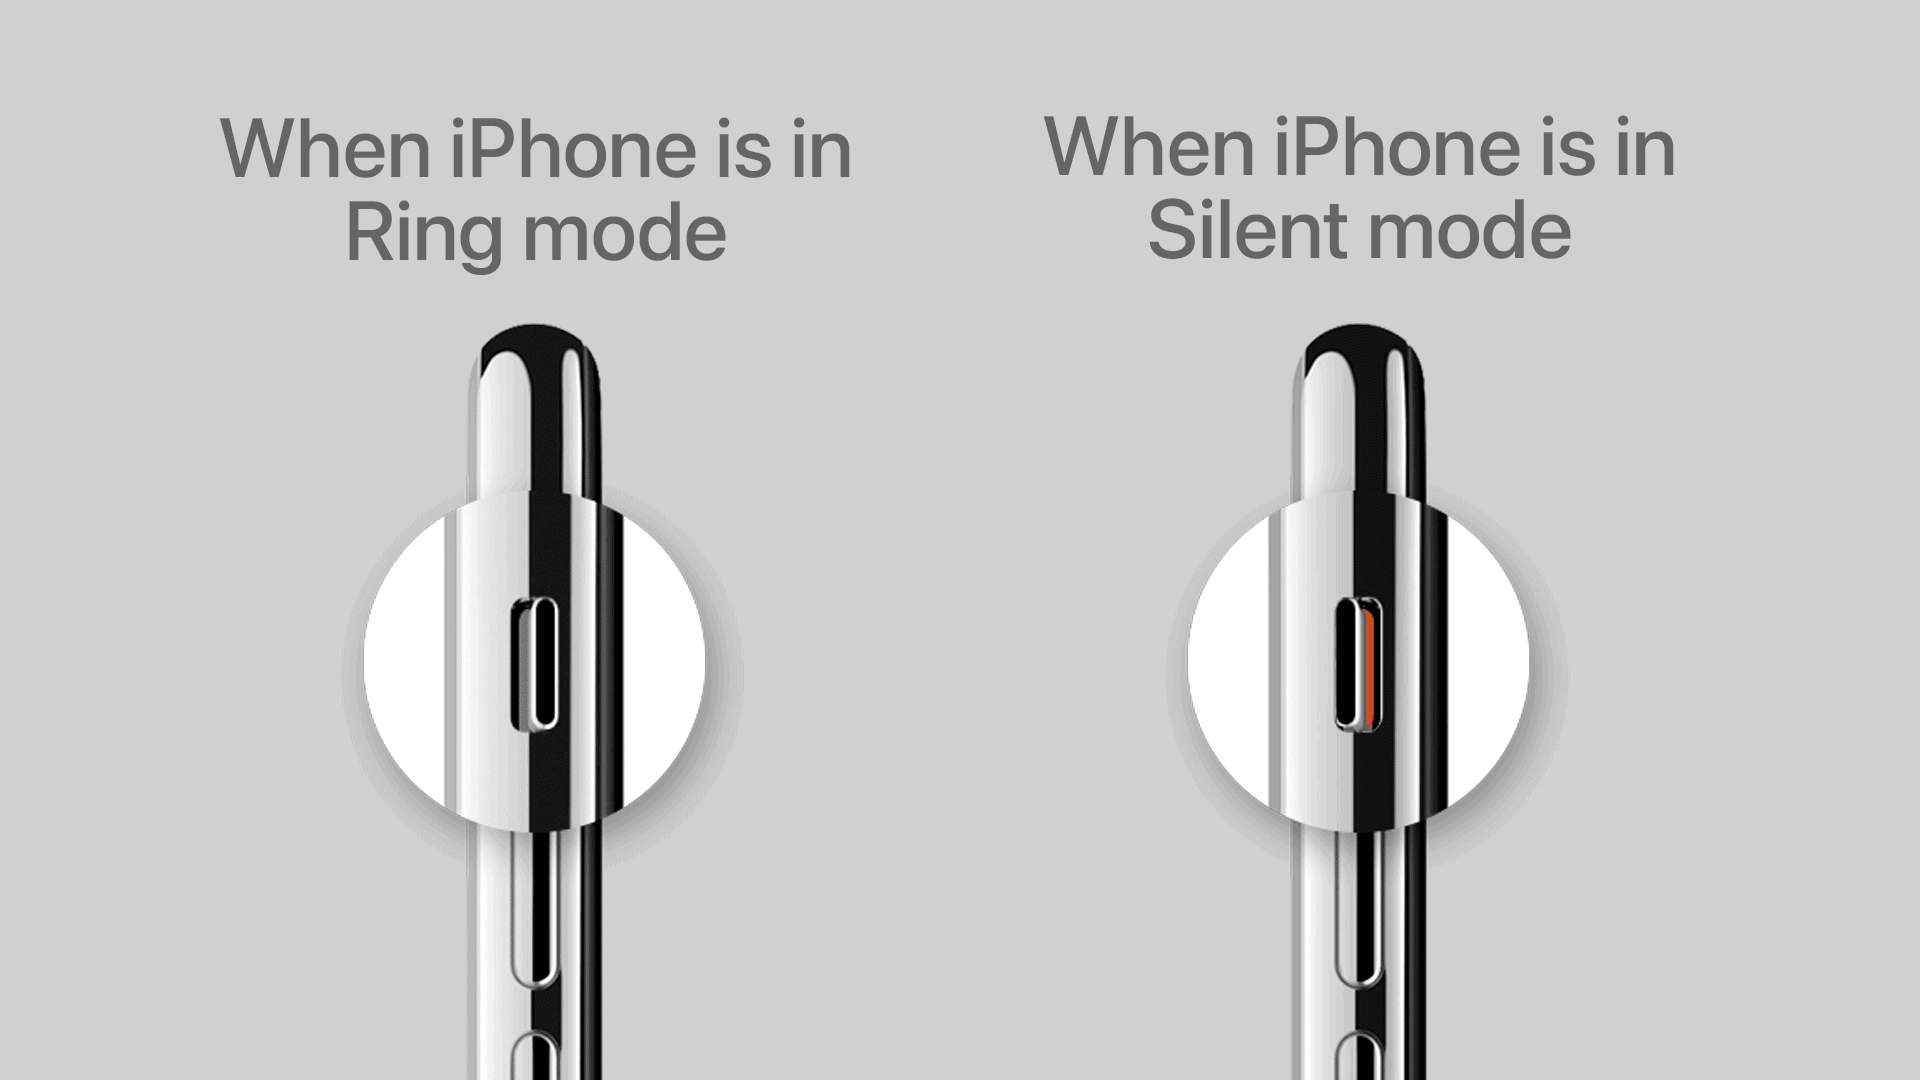 Make sure iPhone is not silent